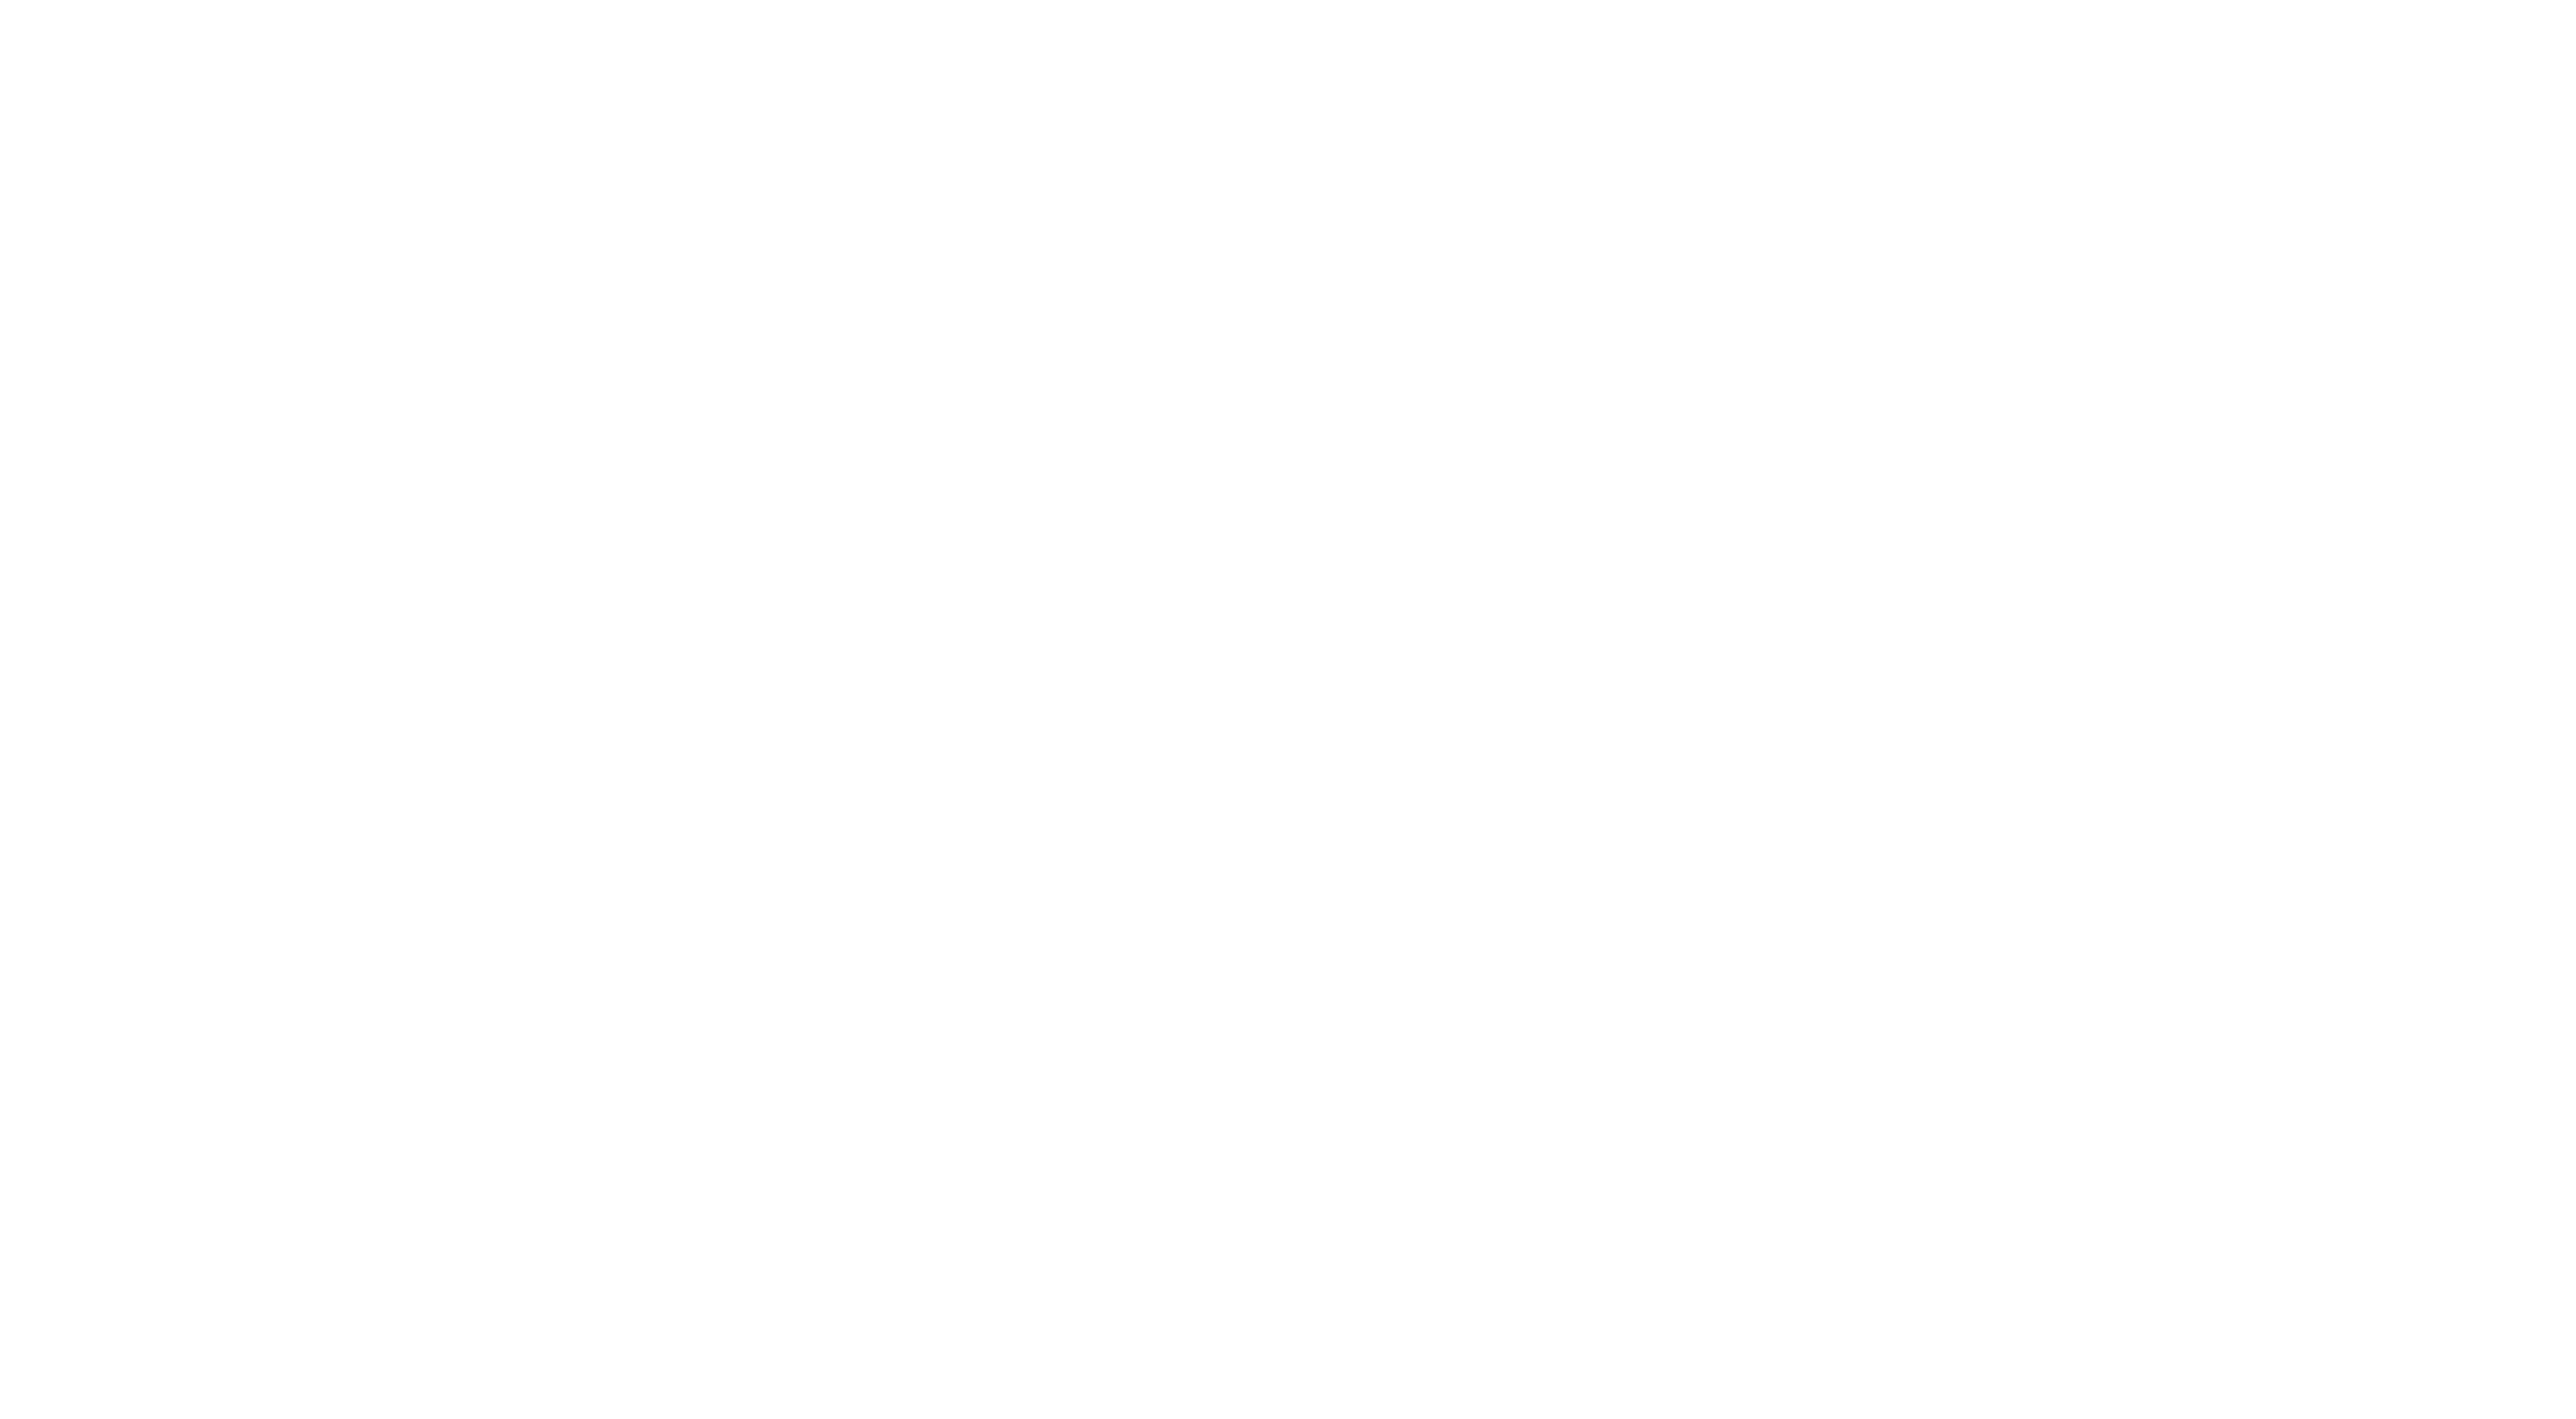 The Center for Bone and Joint Surgery of the Palm Beaches